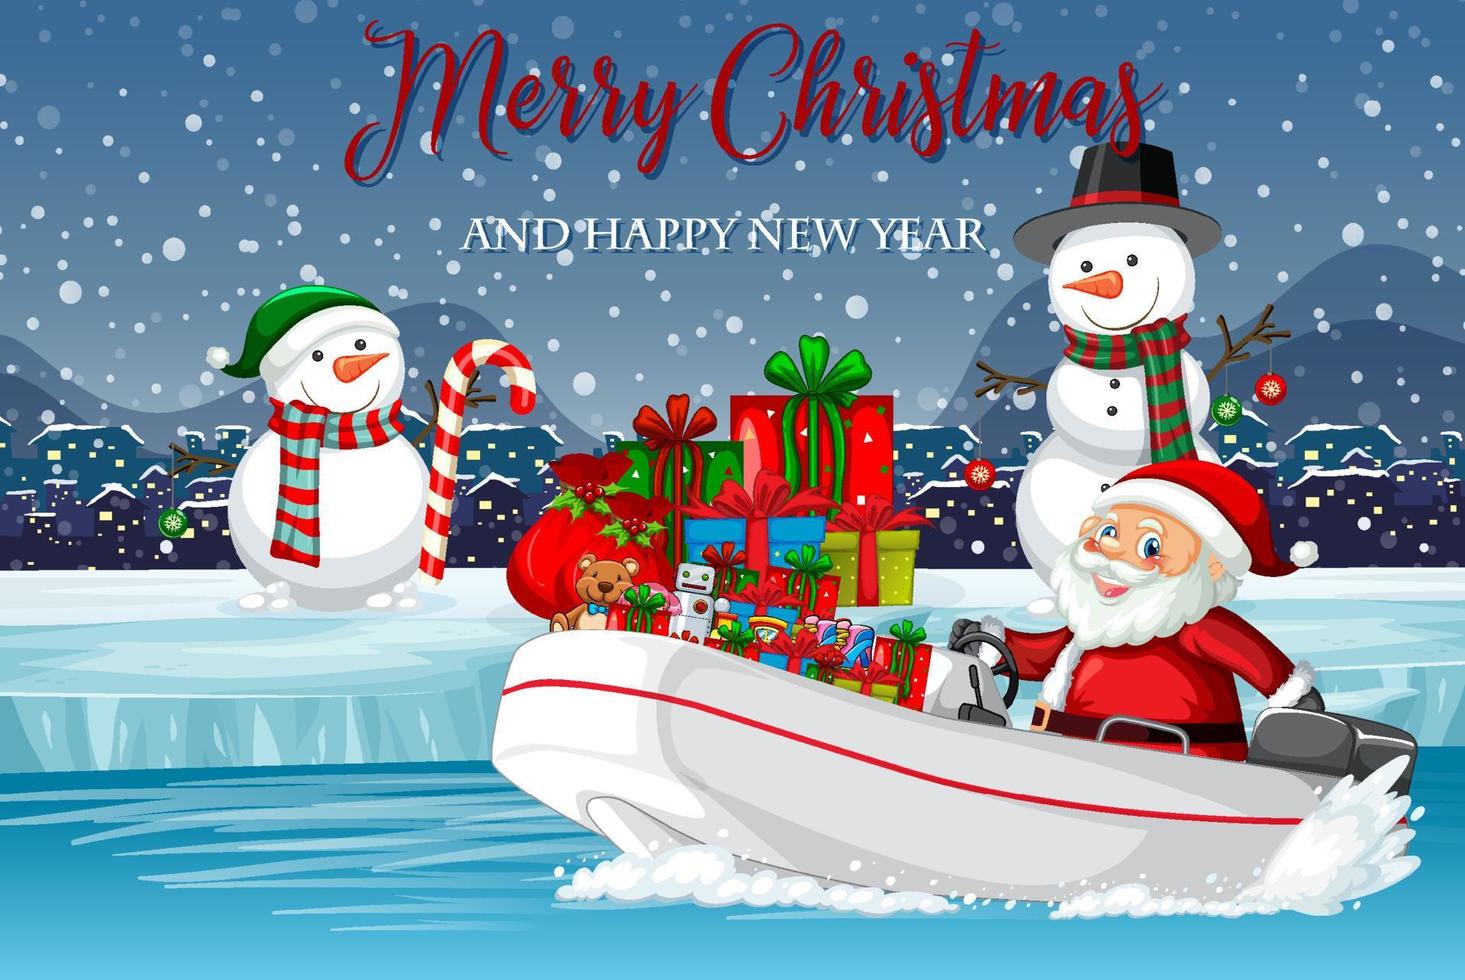 Merry Christmas poster with Santa delivering gifts by speedboat vector